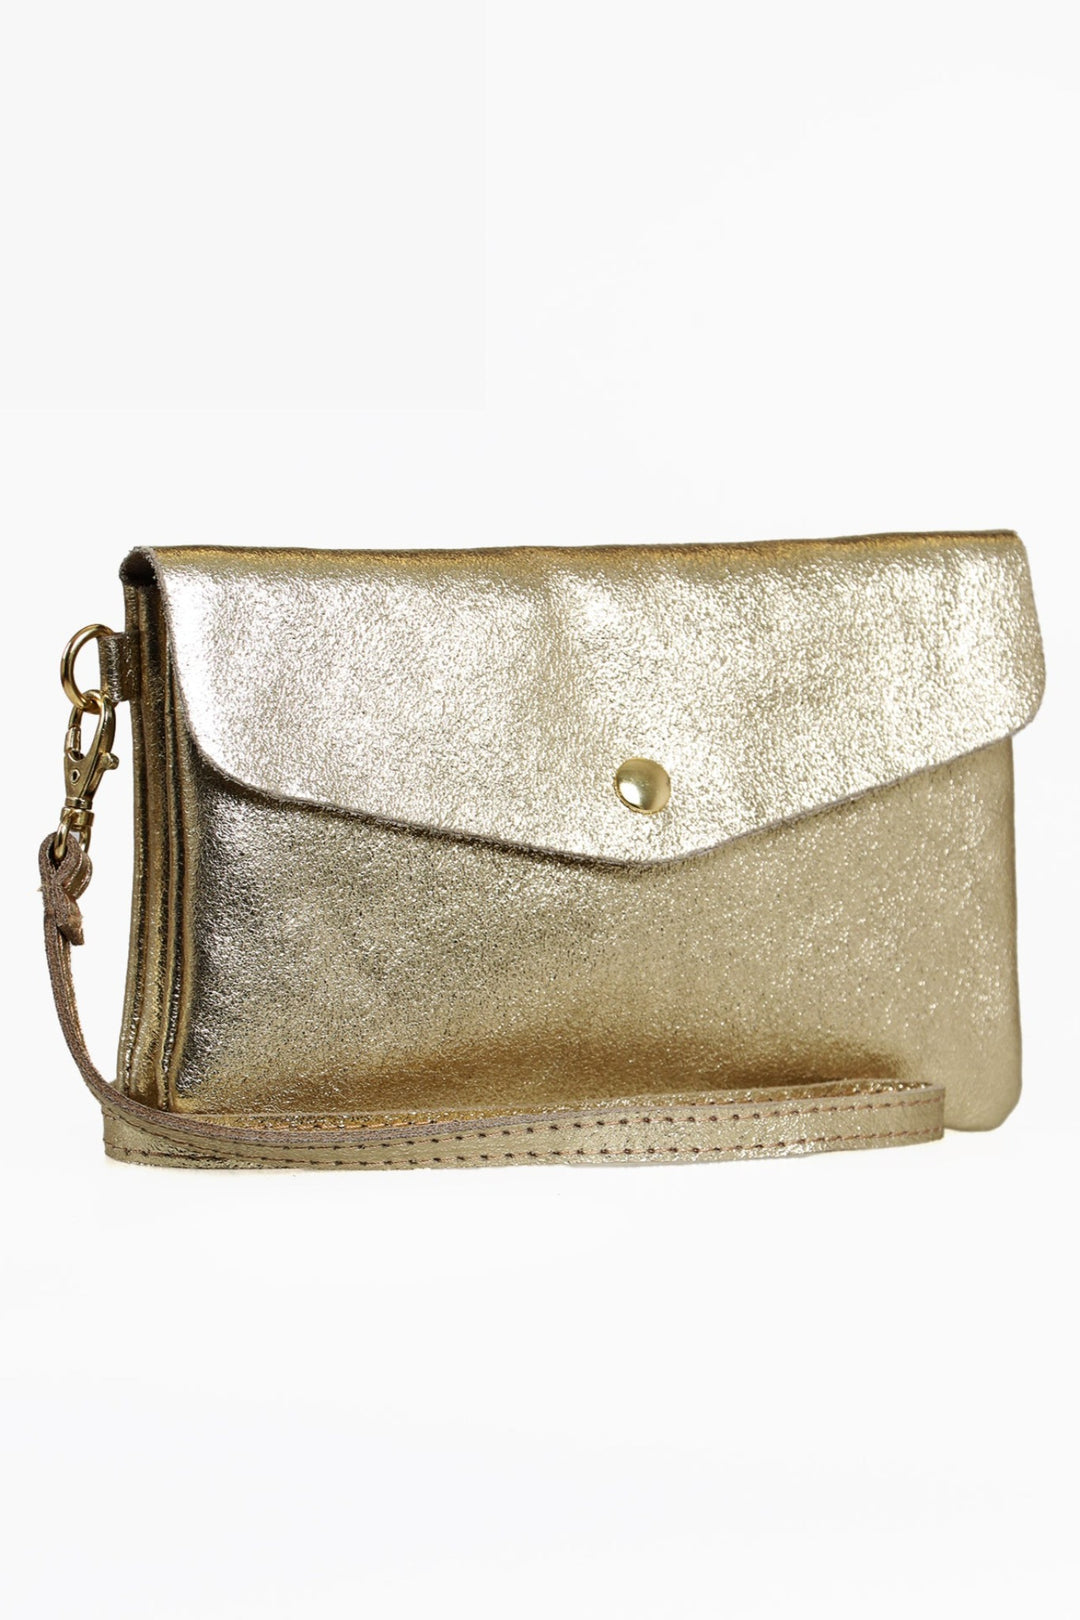 Gold Large Genuine Italian Leather Envelope Clutch